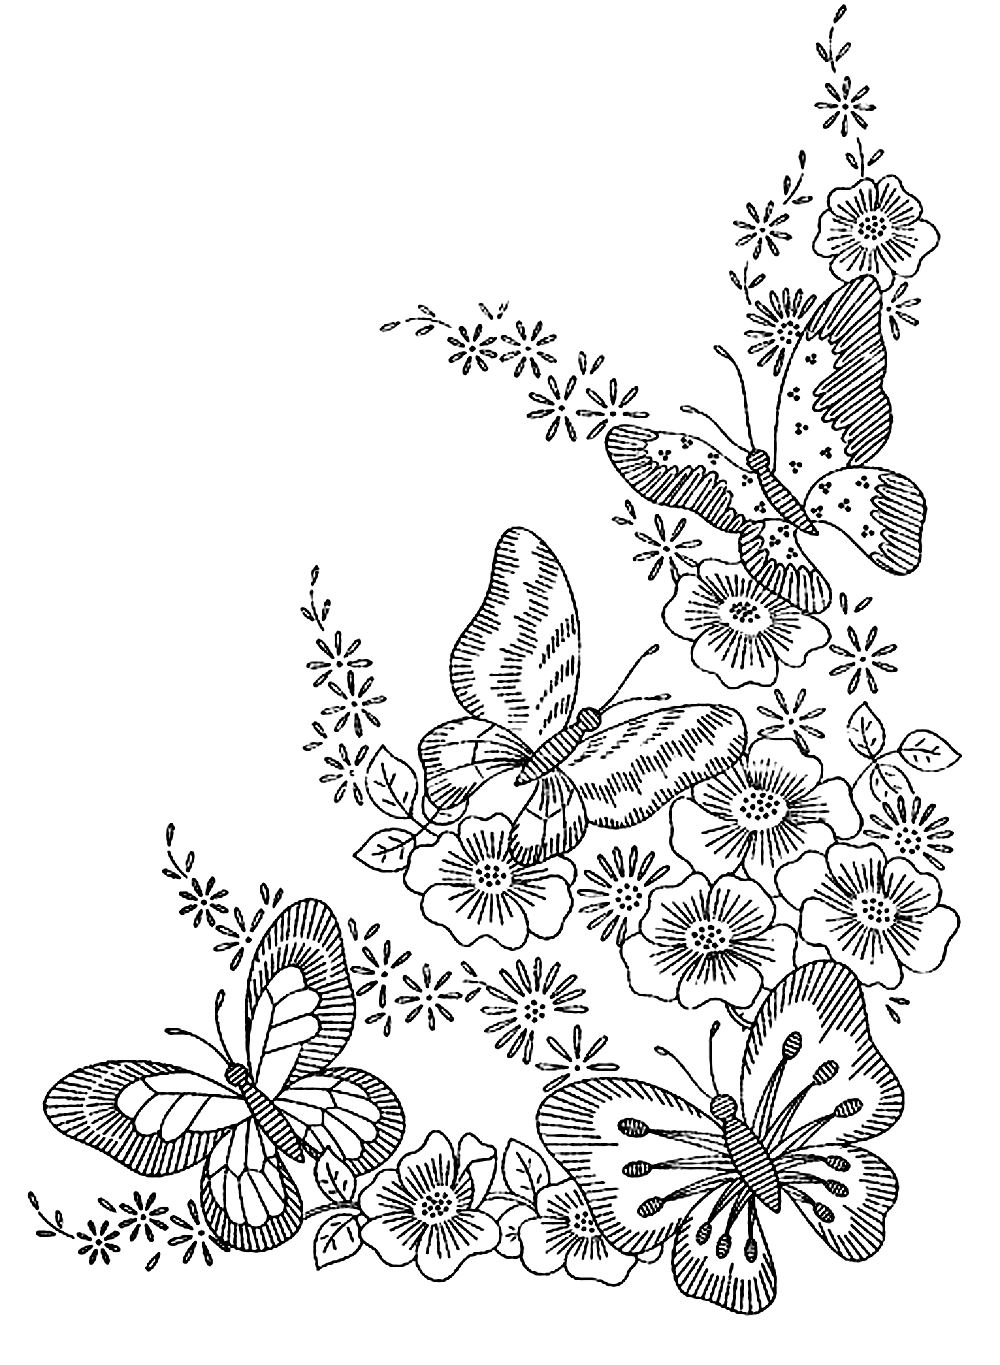 Download Butterflies - Butterflies & insects Adult Coloring Pages ...